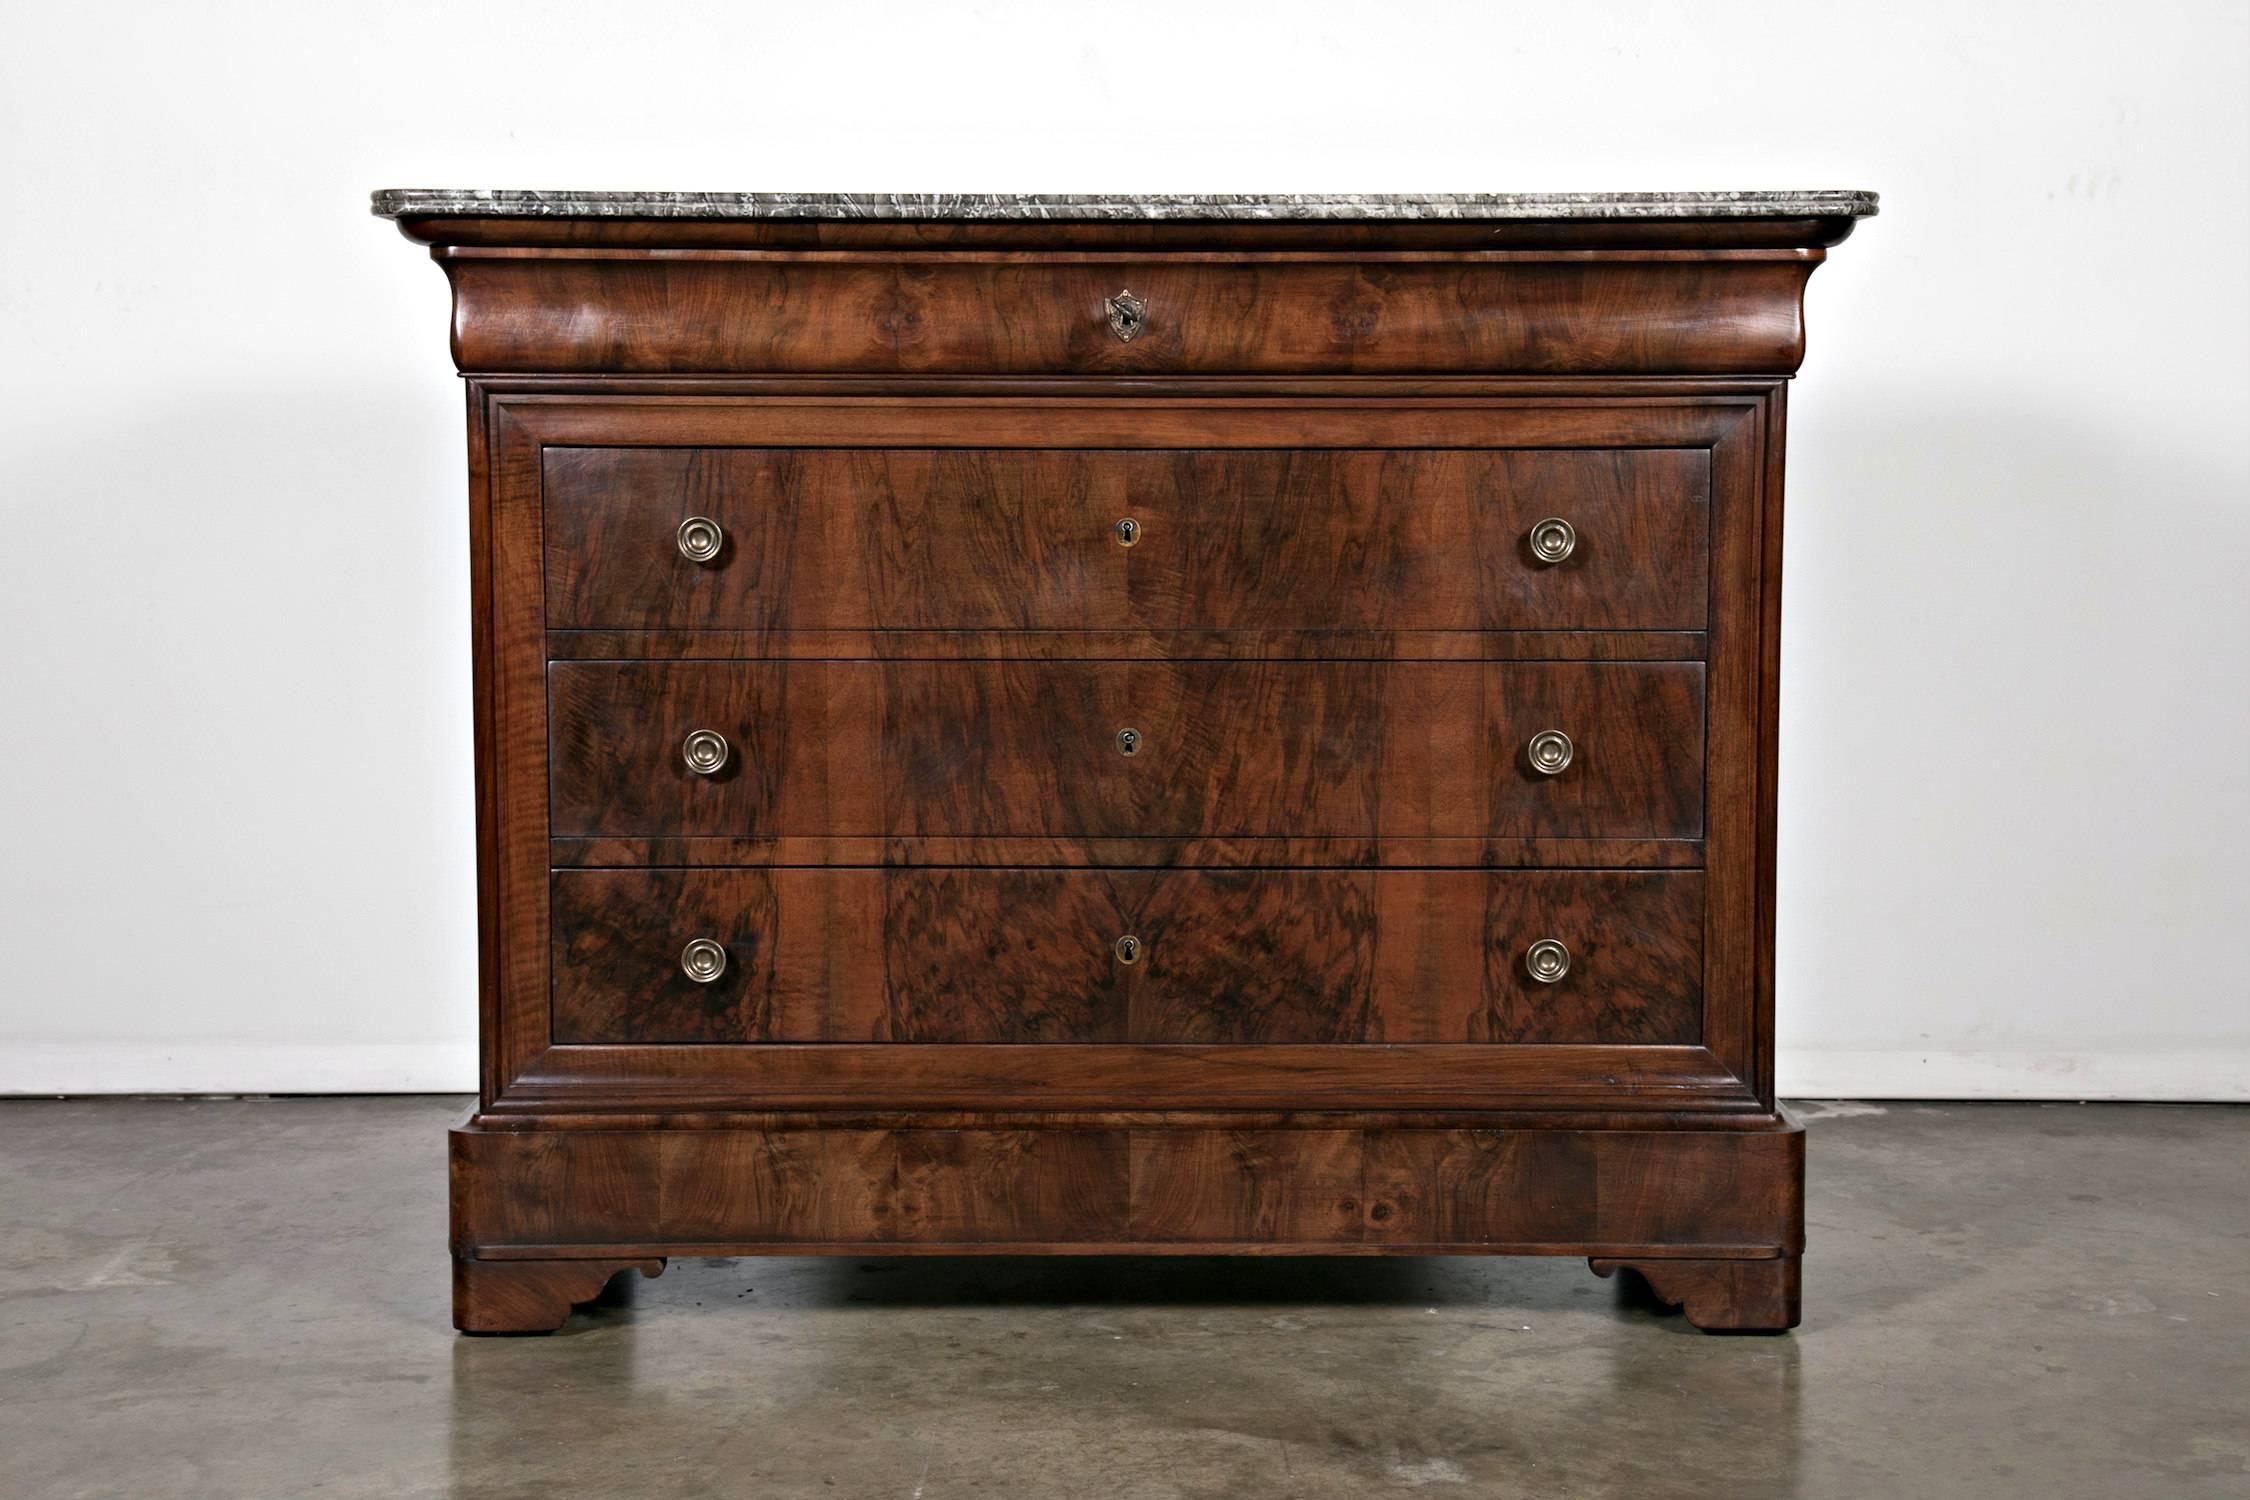 A handsome French Louis Philippe period commode of solid walnut with a bookmatched front. Featuring a Saint Anne ogee marble top above a long doucine drawer with three fitted drawers below, resting upon pistolet feet. The three lower drawers have a